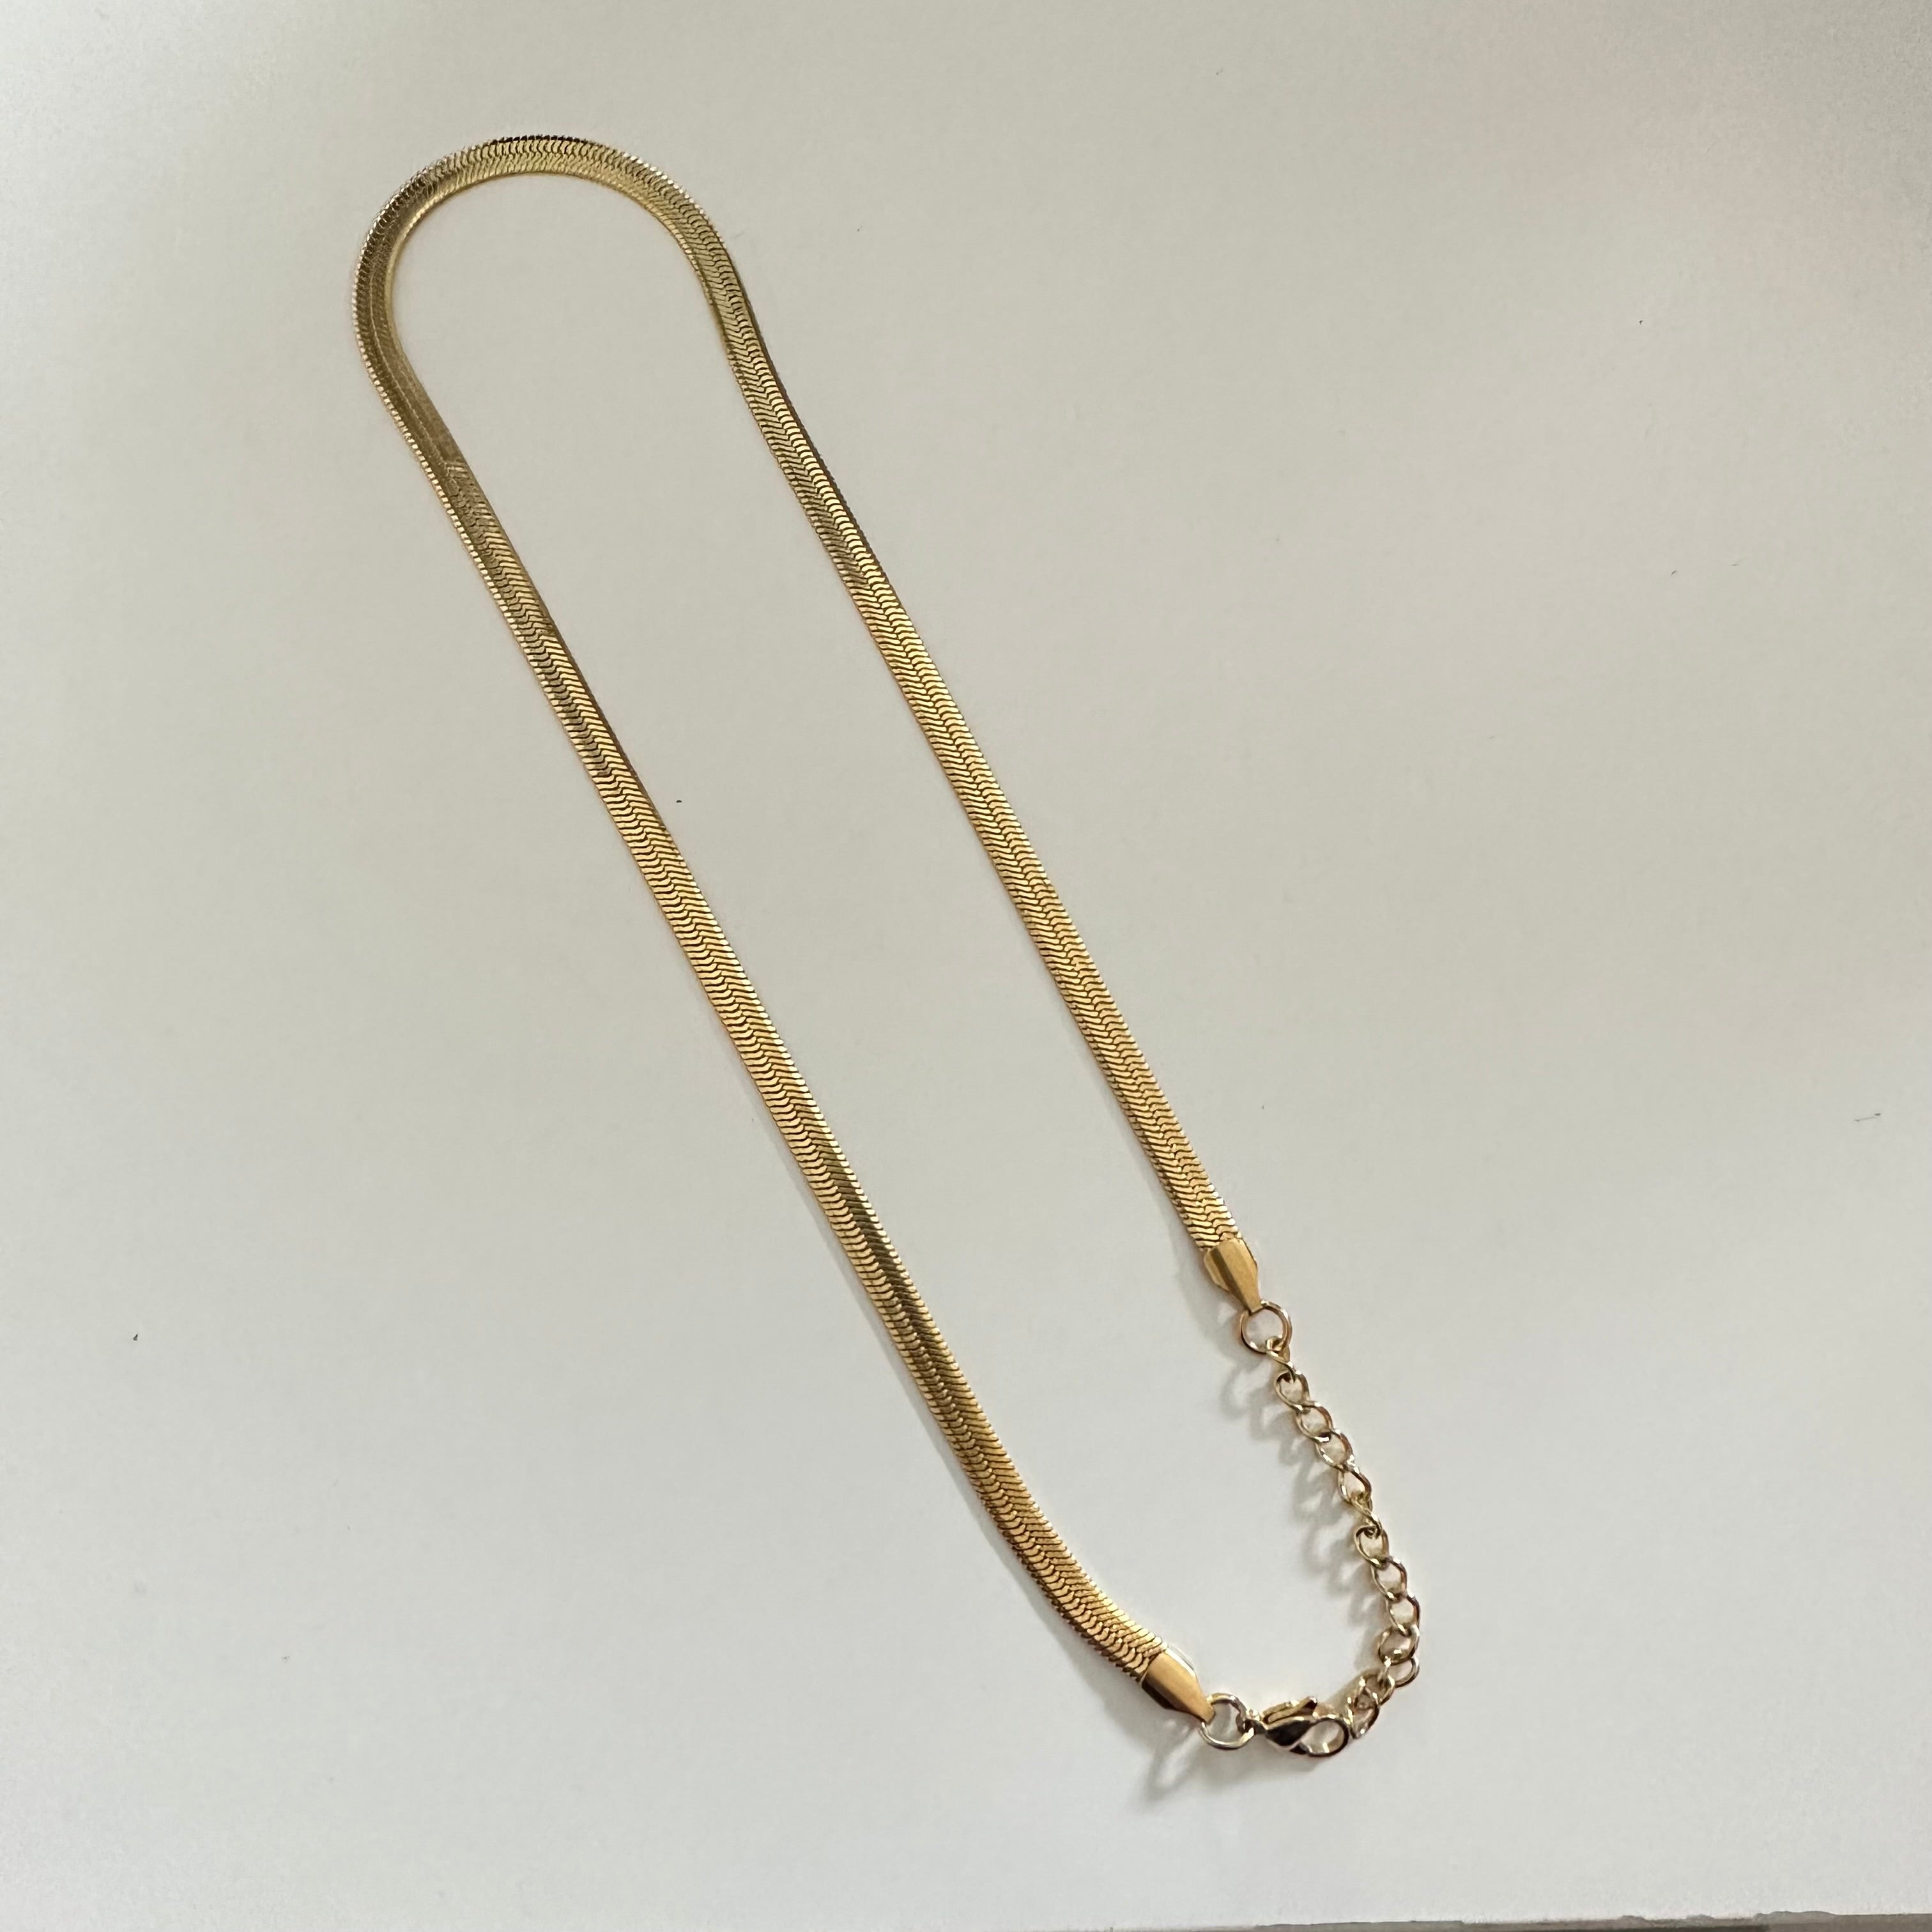 Flat Snake Chain Necklace in 18k Gold Plated Brass - The Anji Necklace